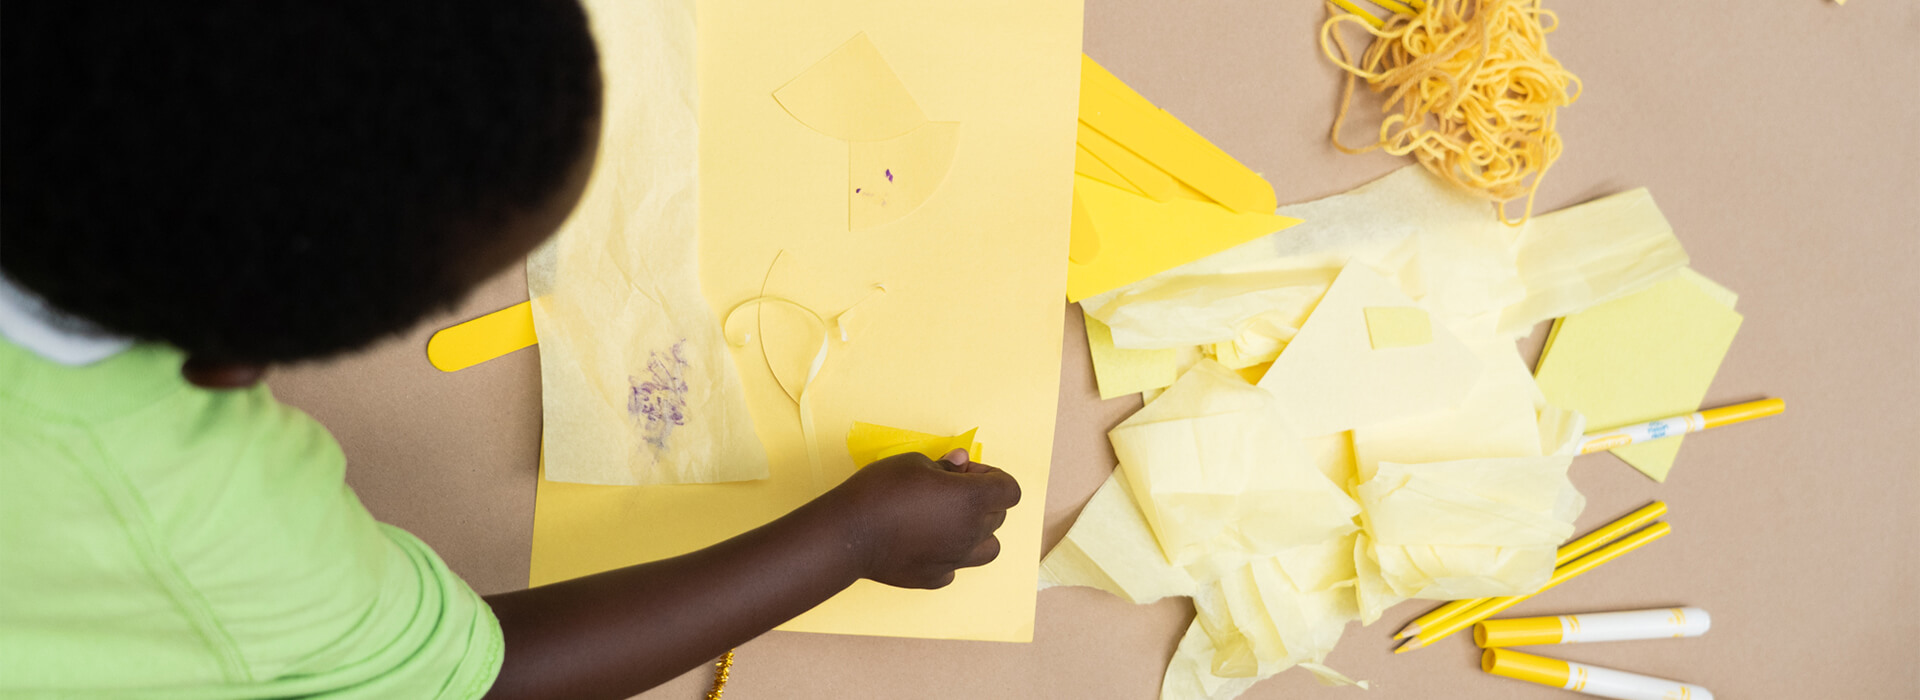 A child makes art with yellow paper and supplies